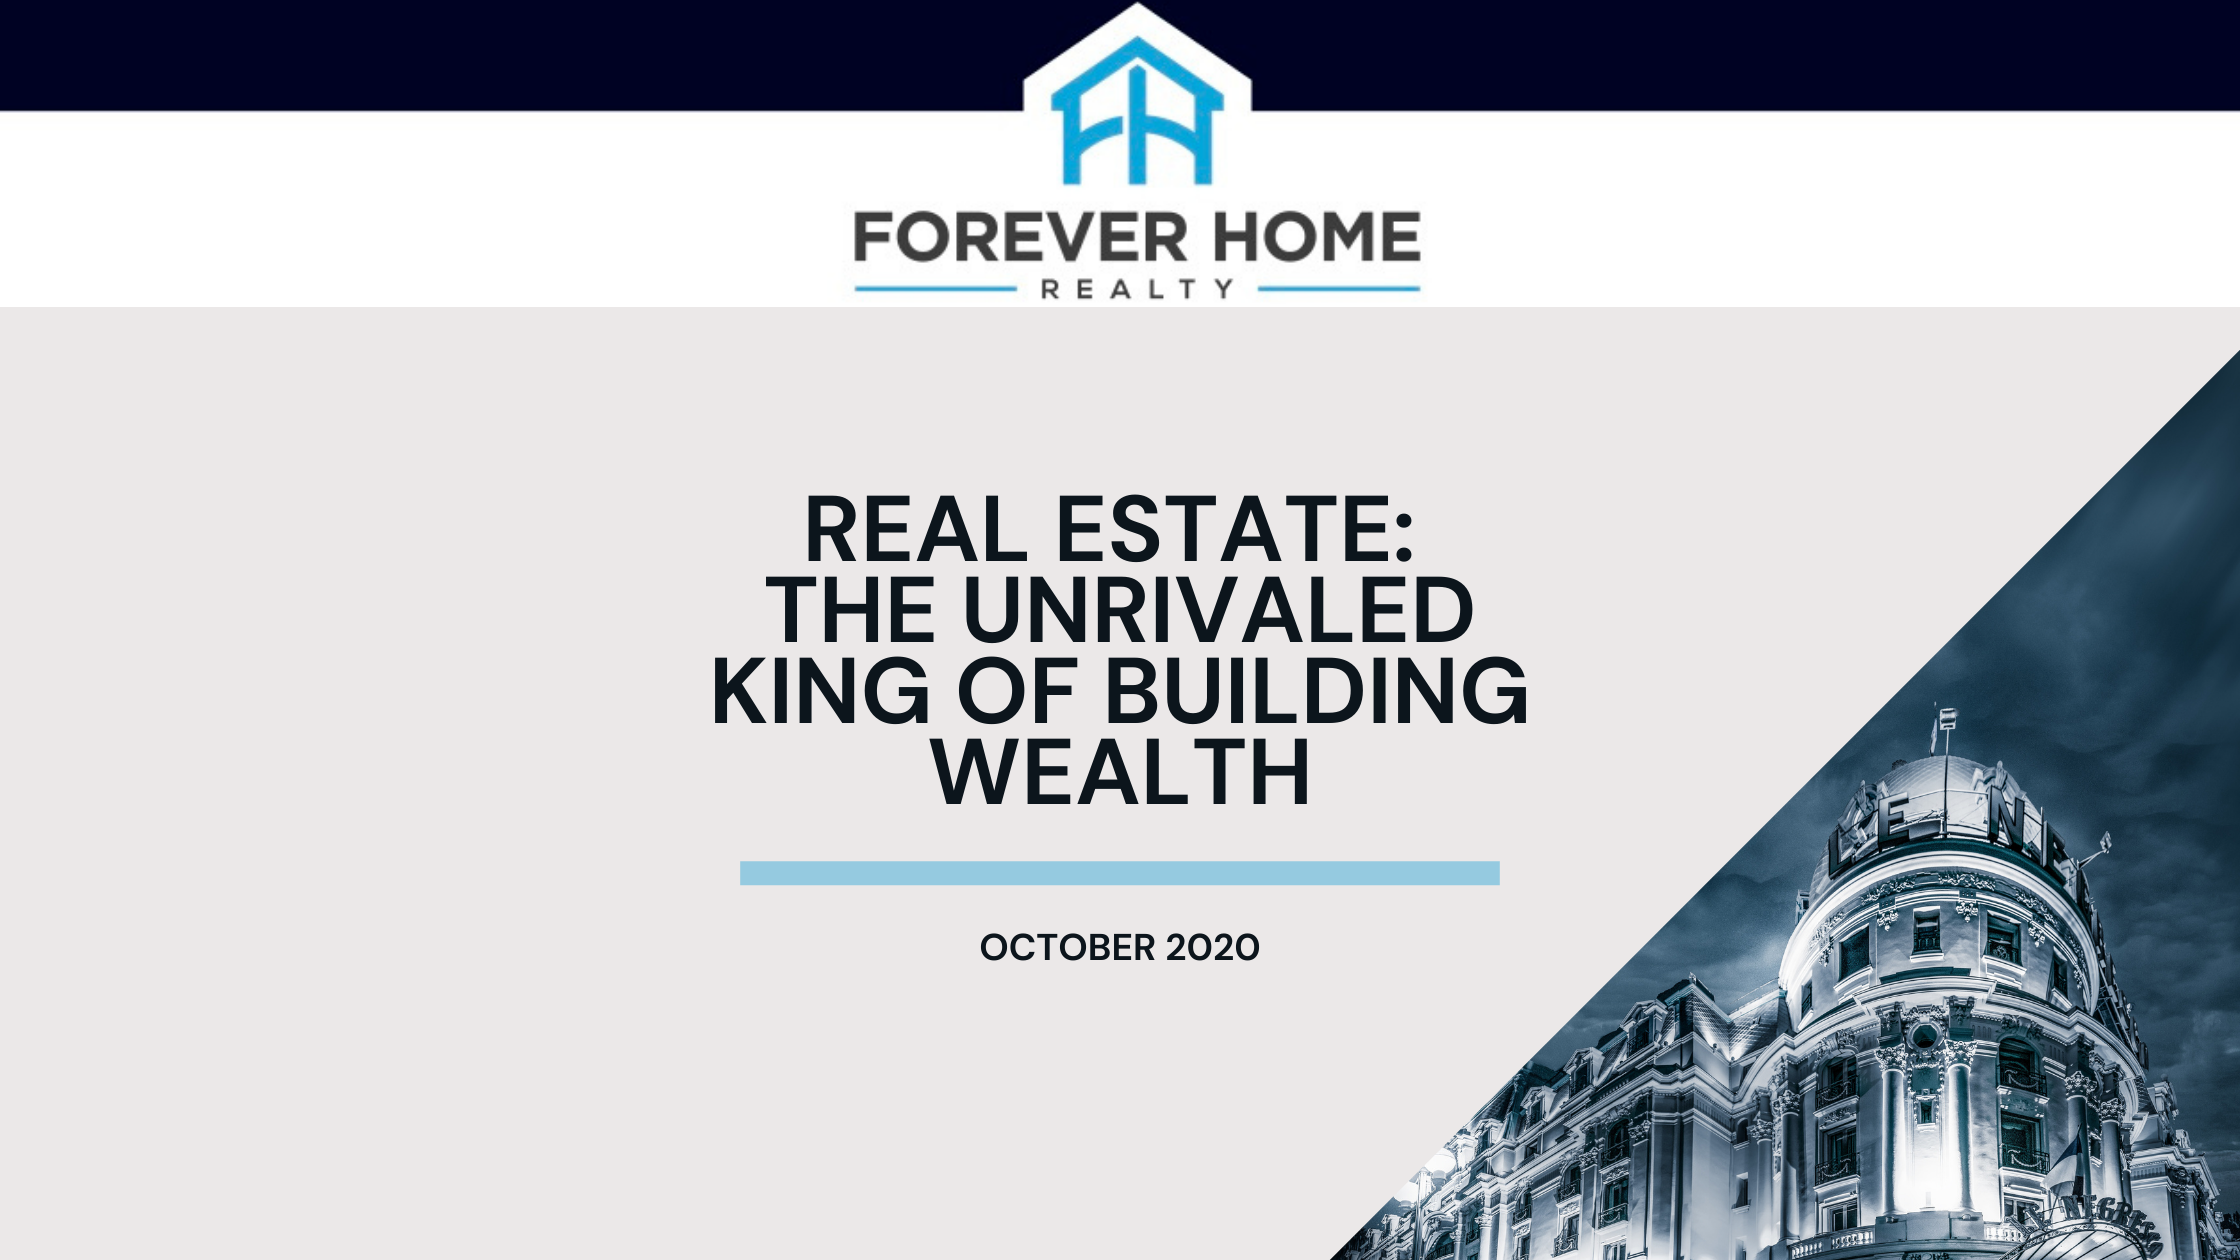 Real Estate: The Unrivaled King of Building Wealth